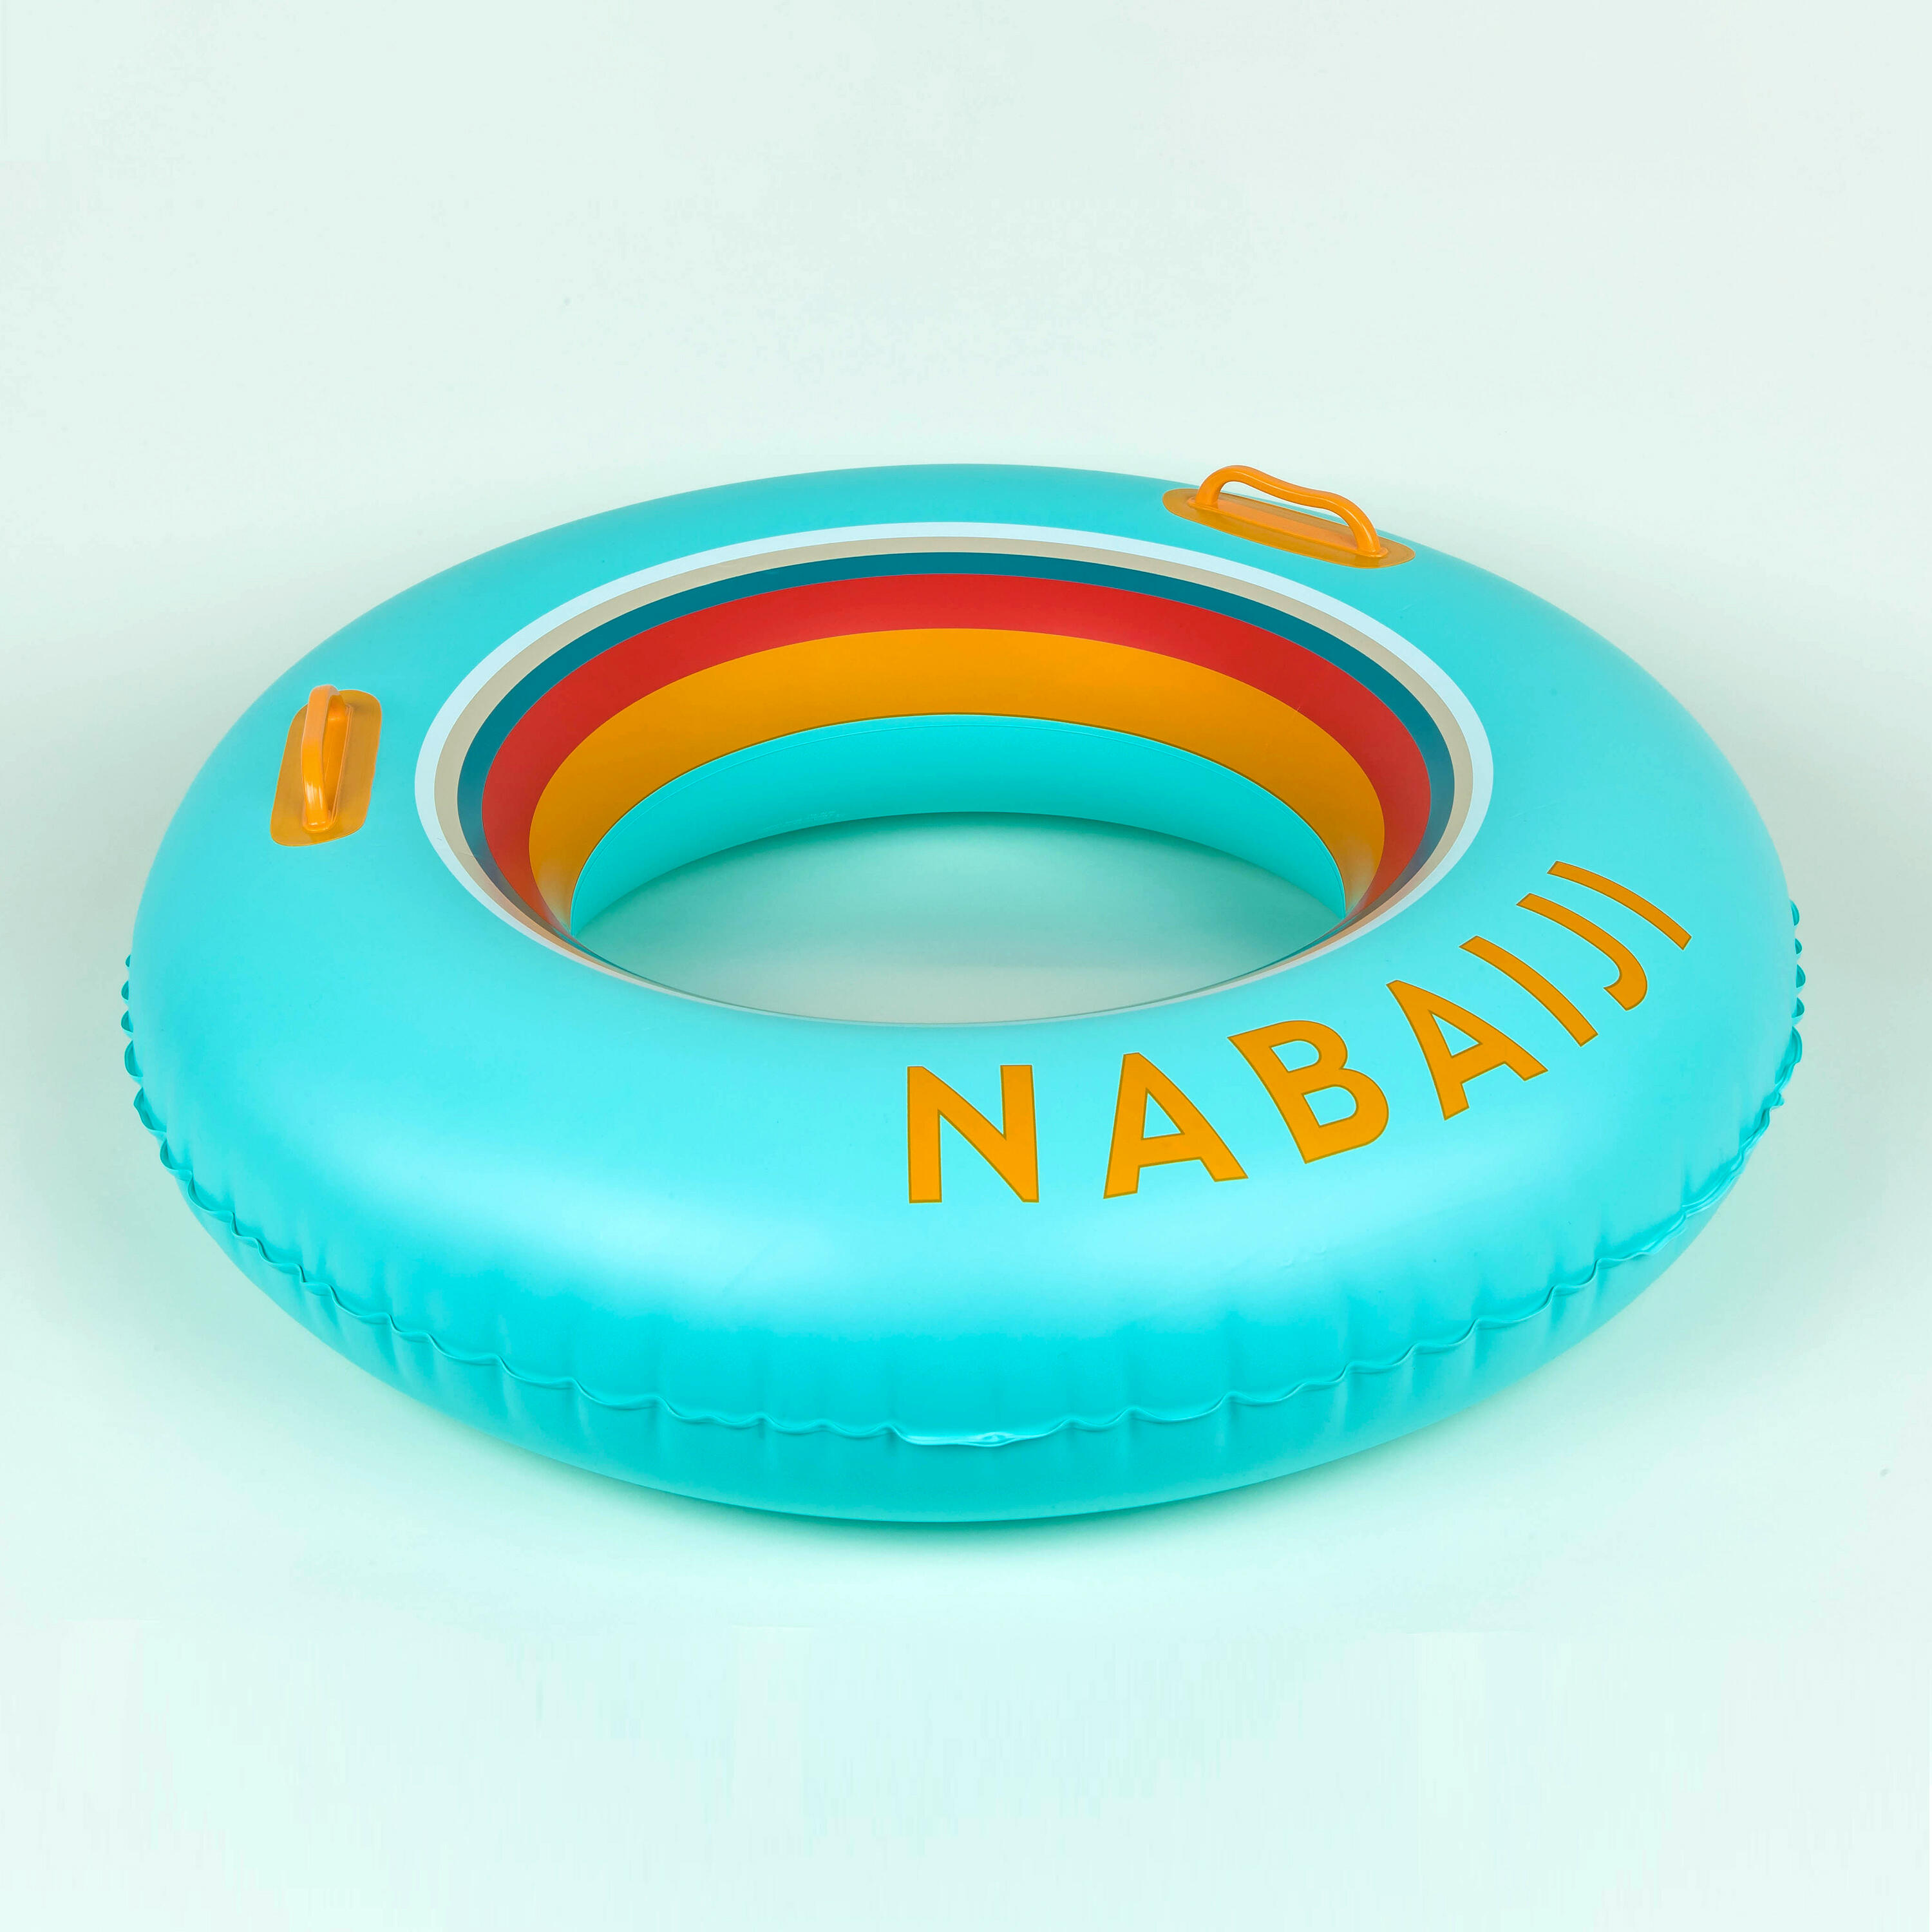 Large 92 cm inflatable printed pool ring with comfort grips 1/7